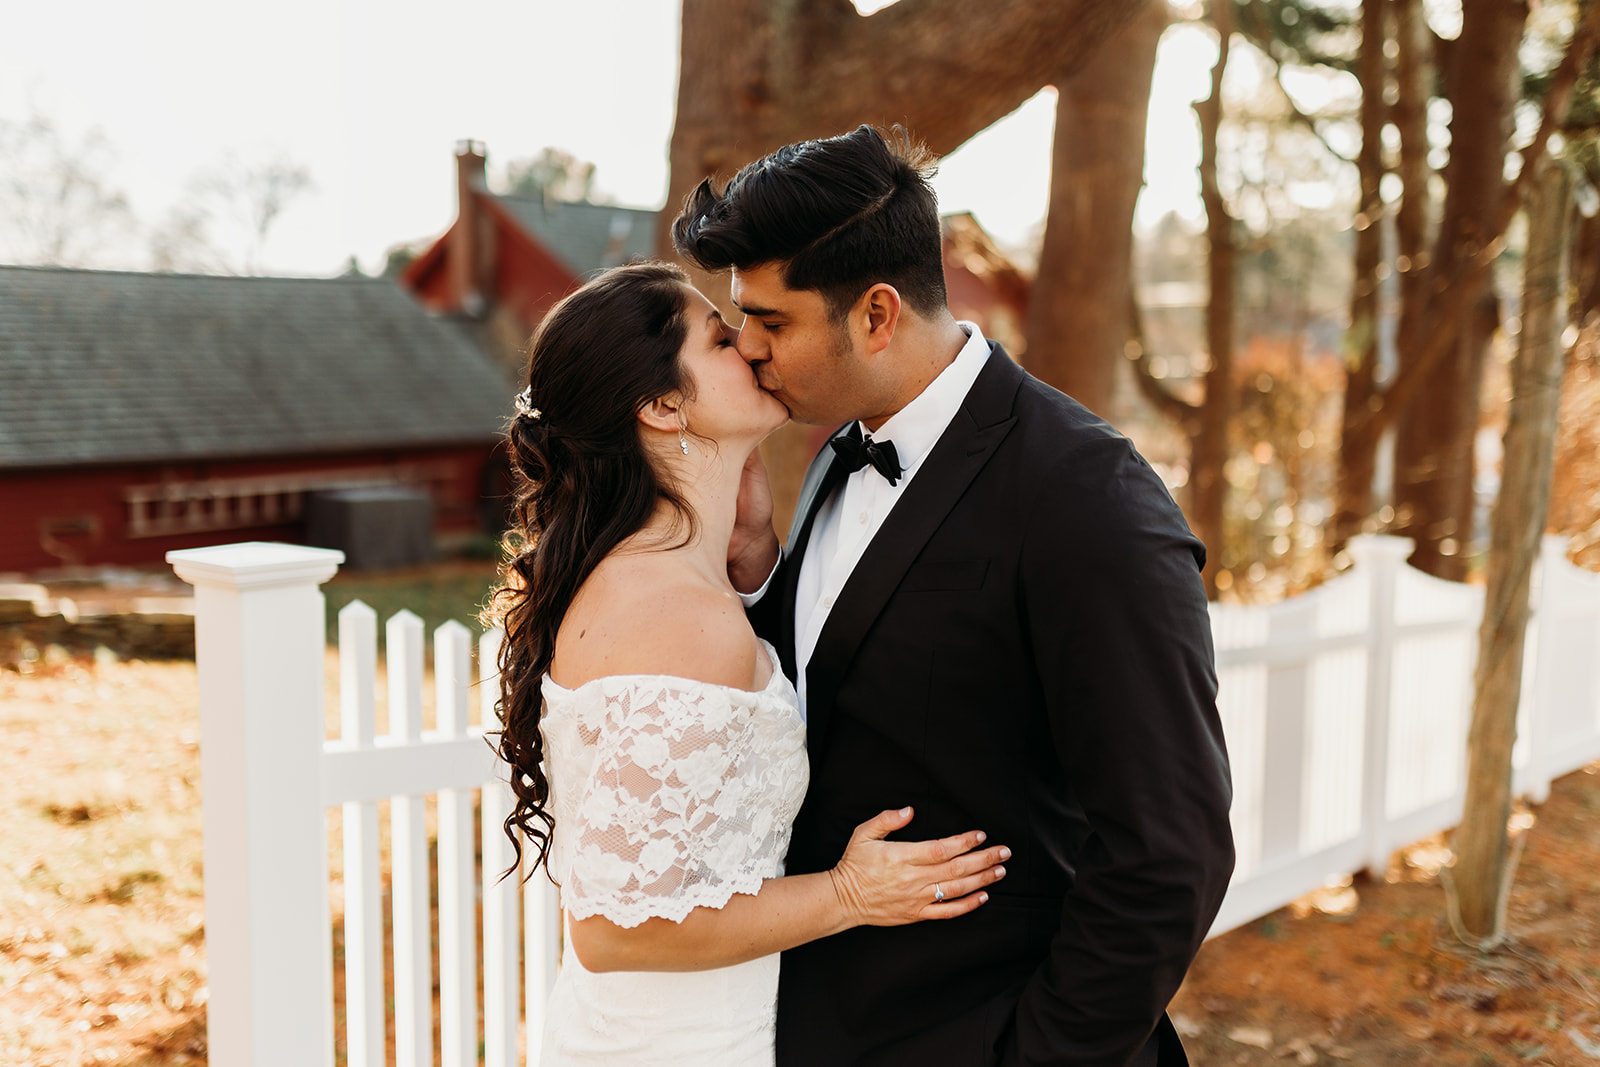 Romantic kiss between the newlyweds against the backdrop of a charming Connecticut home